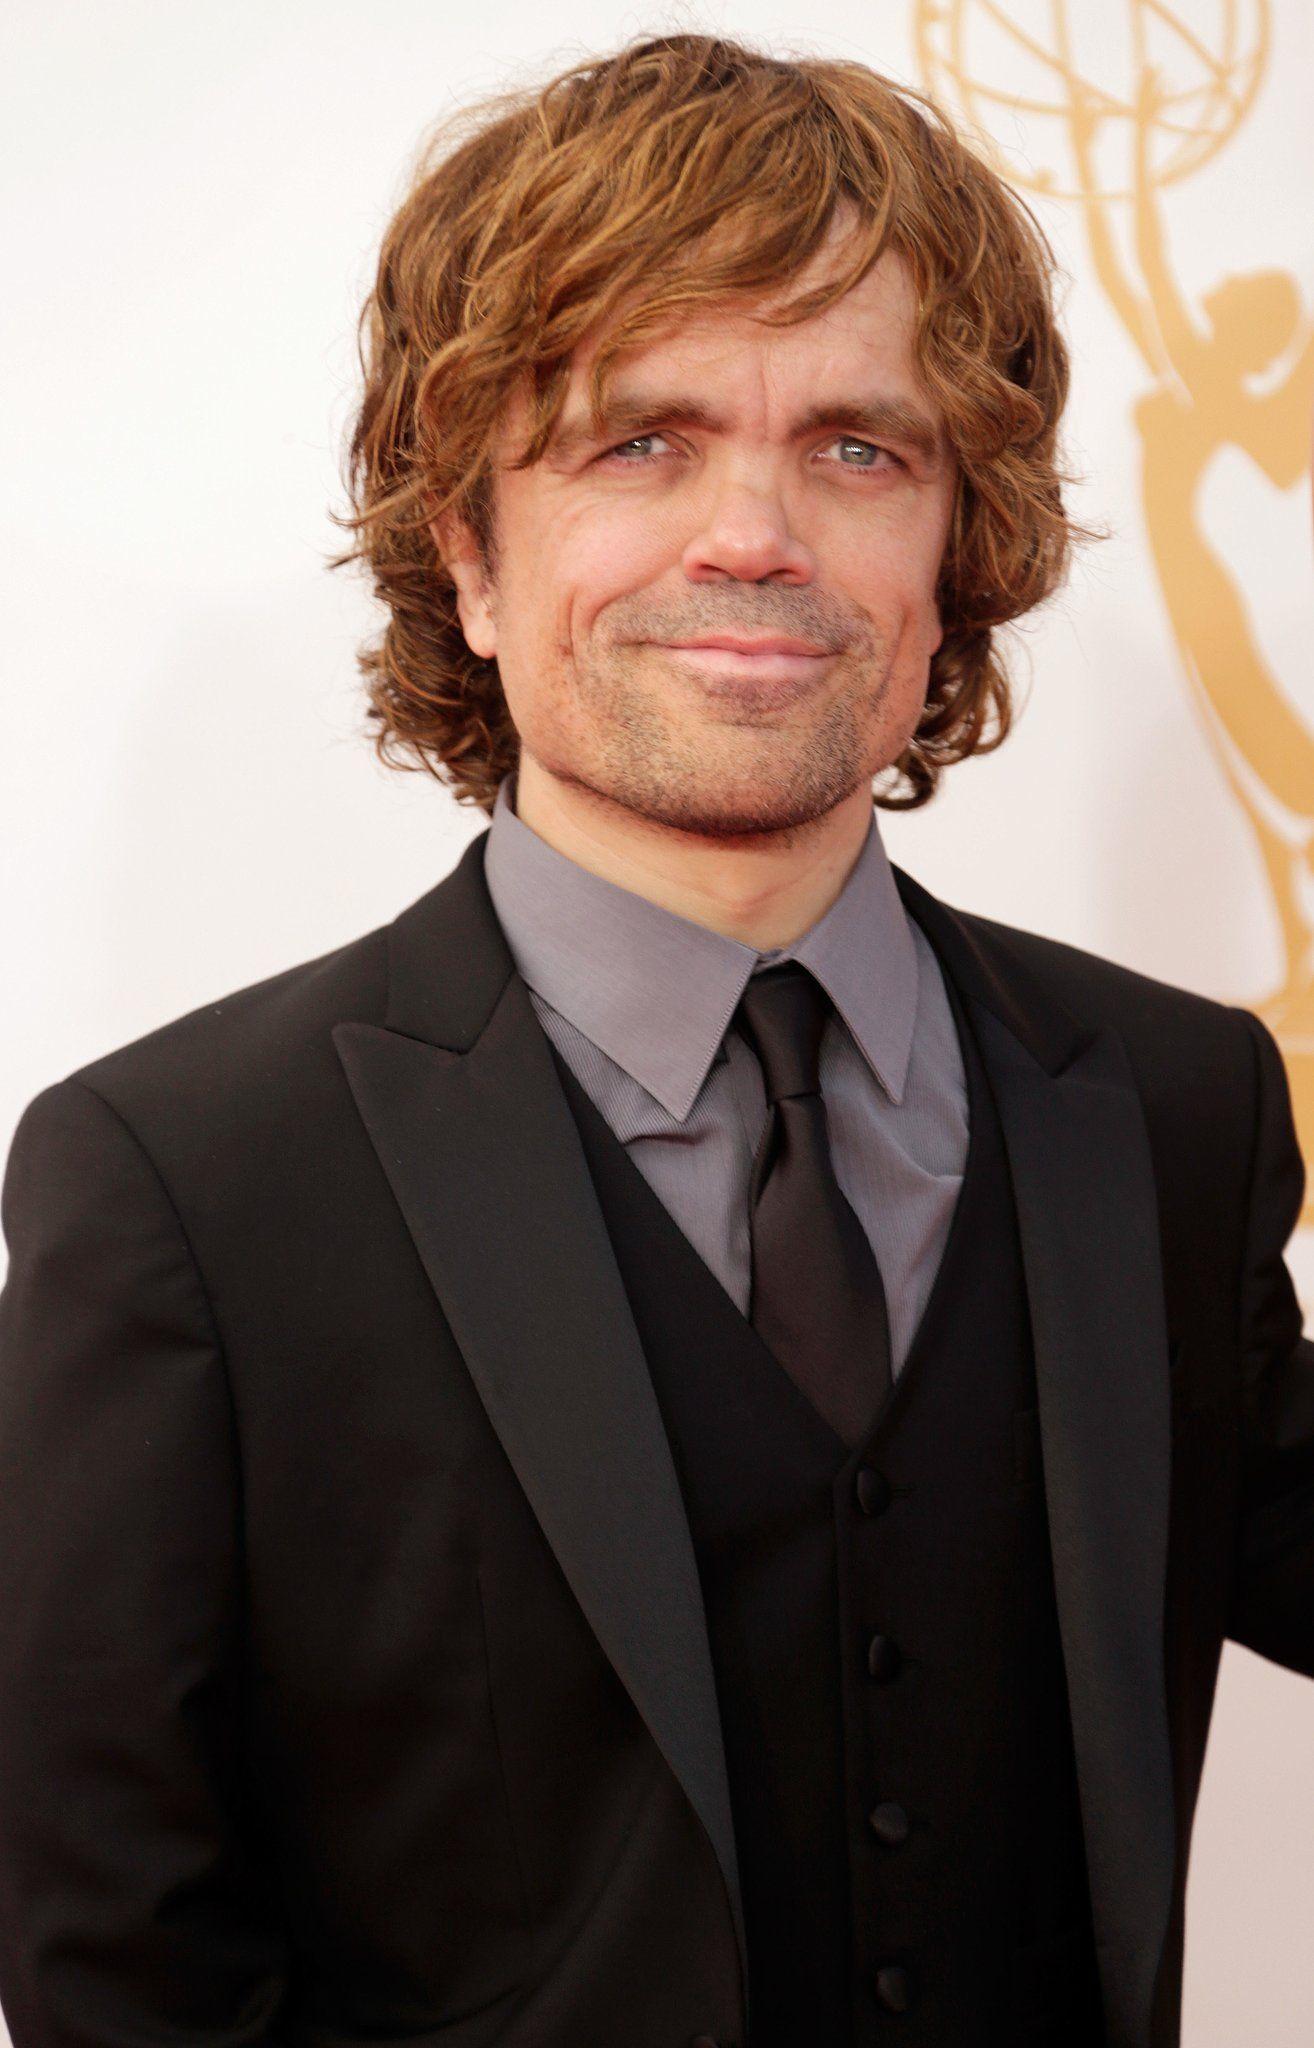 Awesome Peter Dinklage HD Wallpaper Free Download